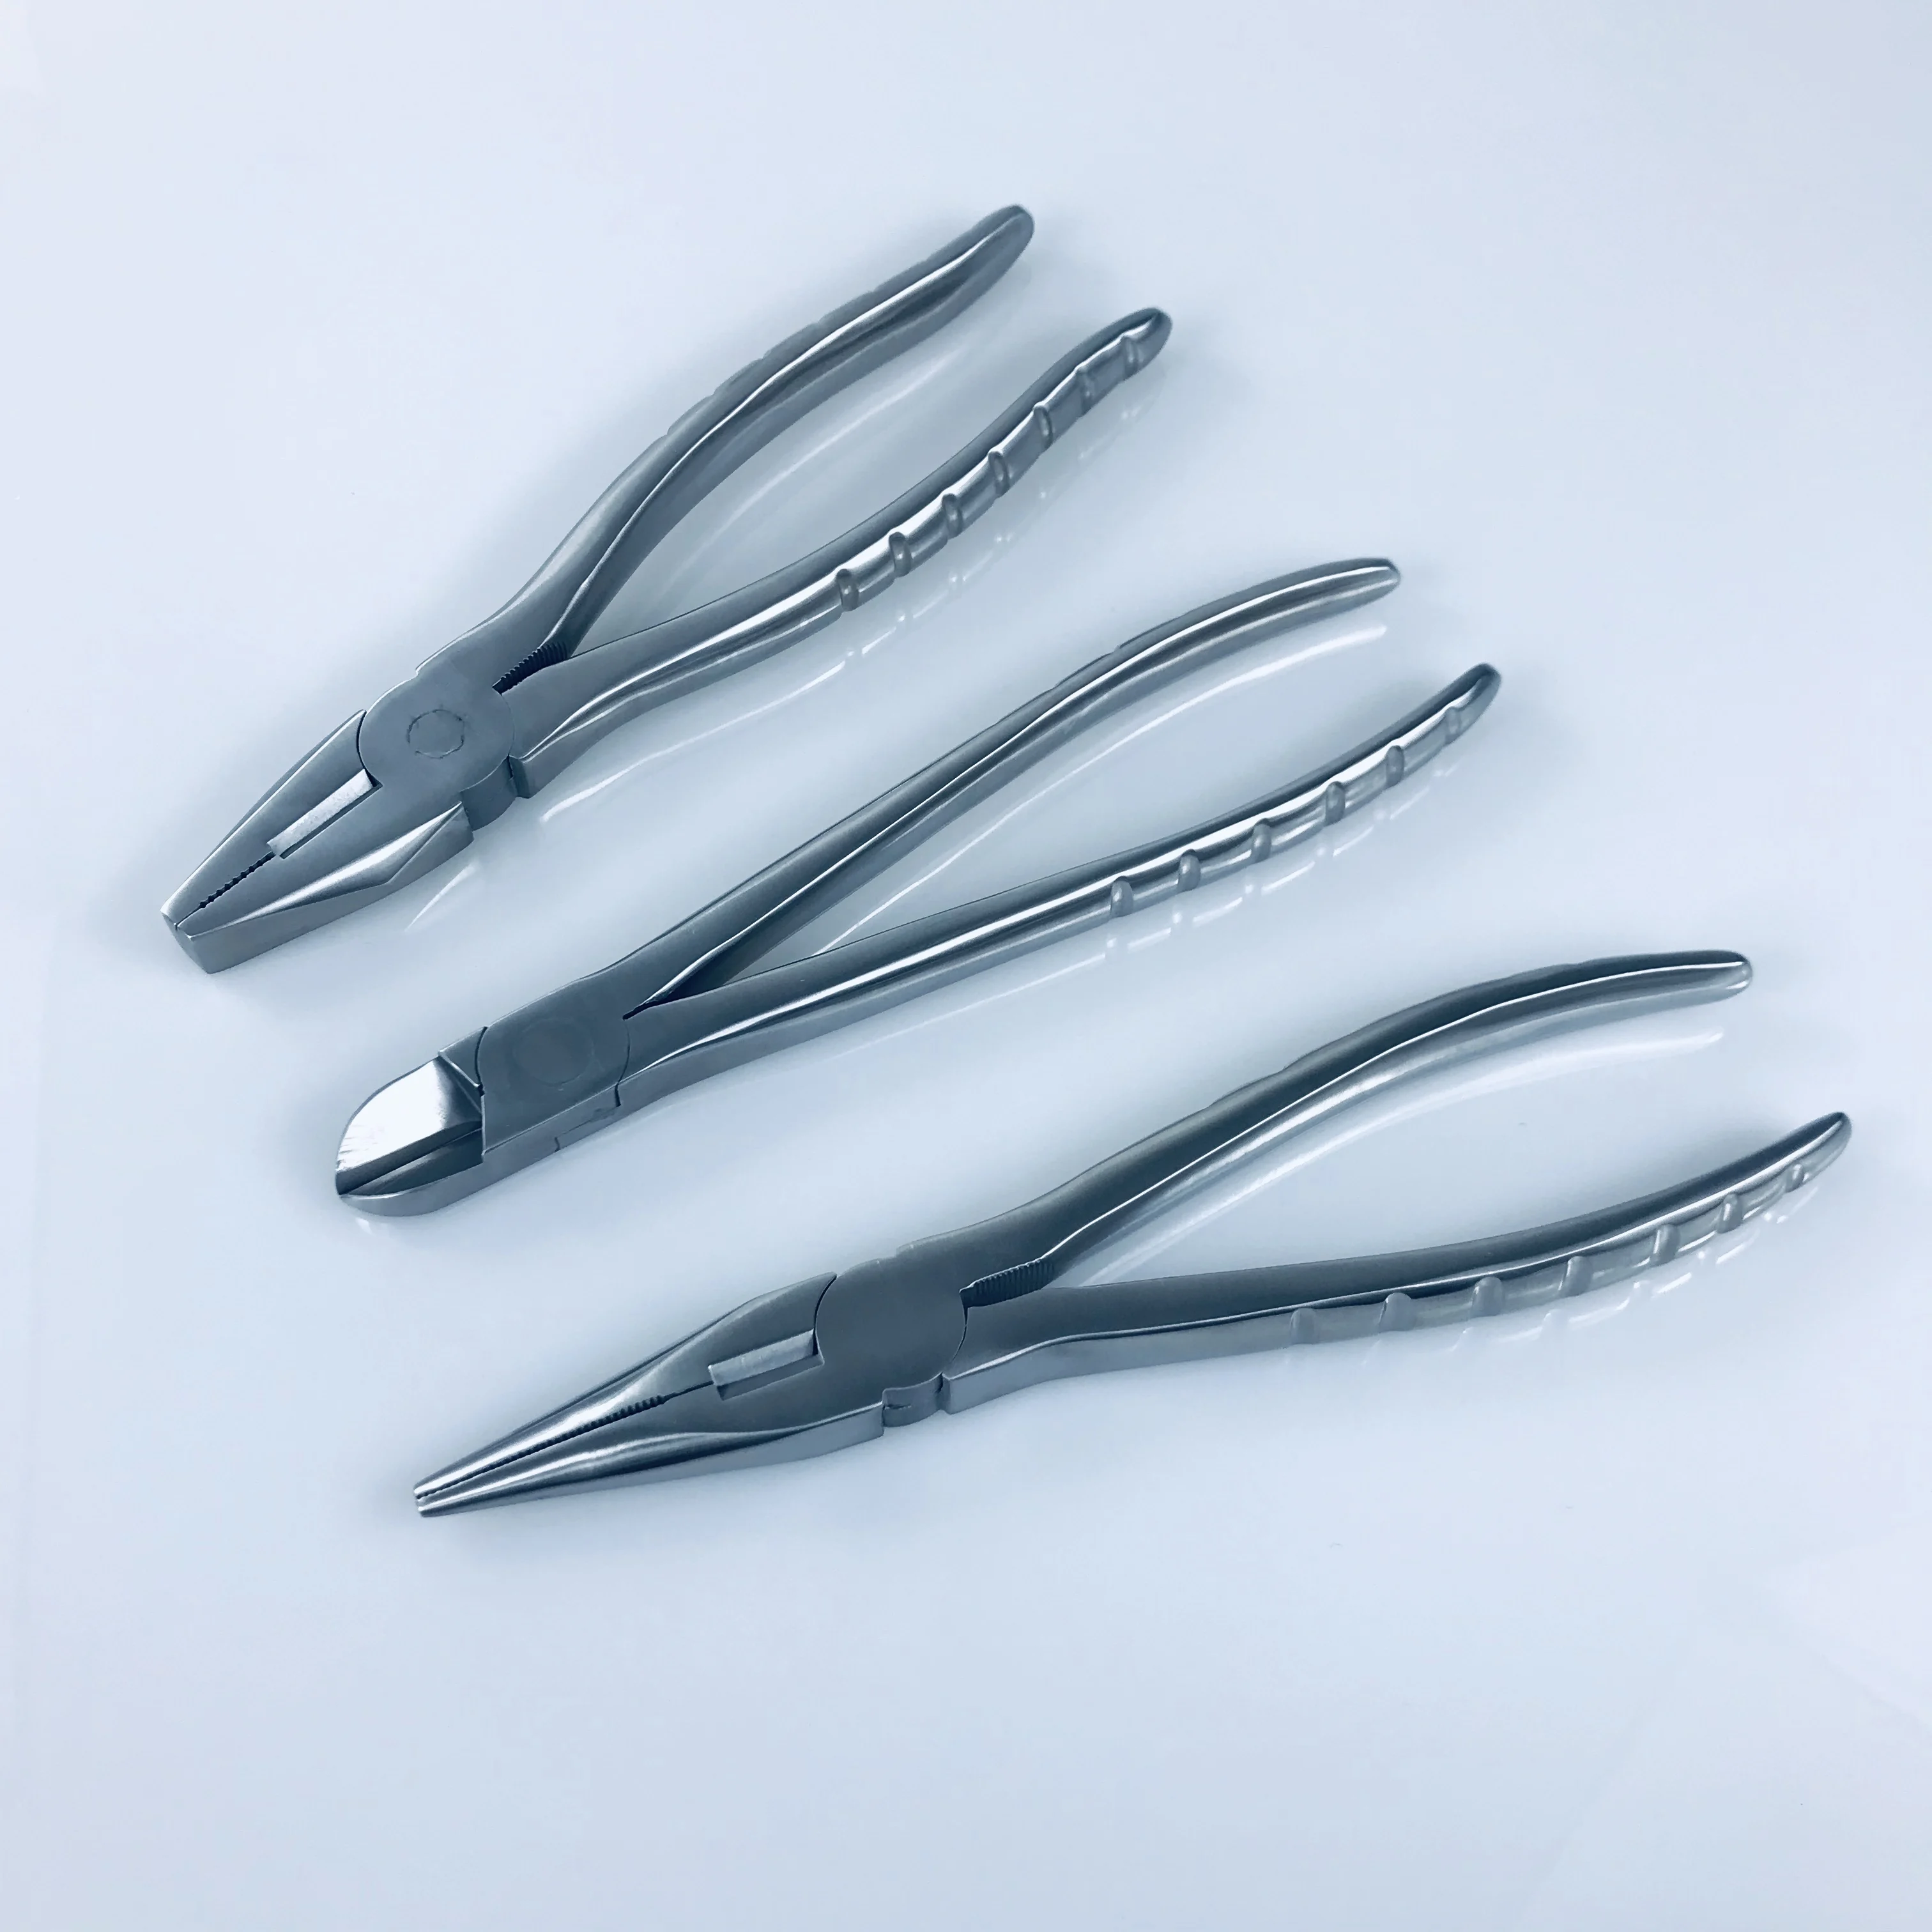 

1pcs Kirschner Wire Cutter Flat Nose Pliers with Serrated Jaws Bone Forcep Pin Orthopedics Veterinary Surgery Instruments